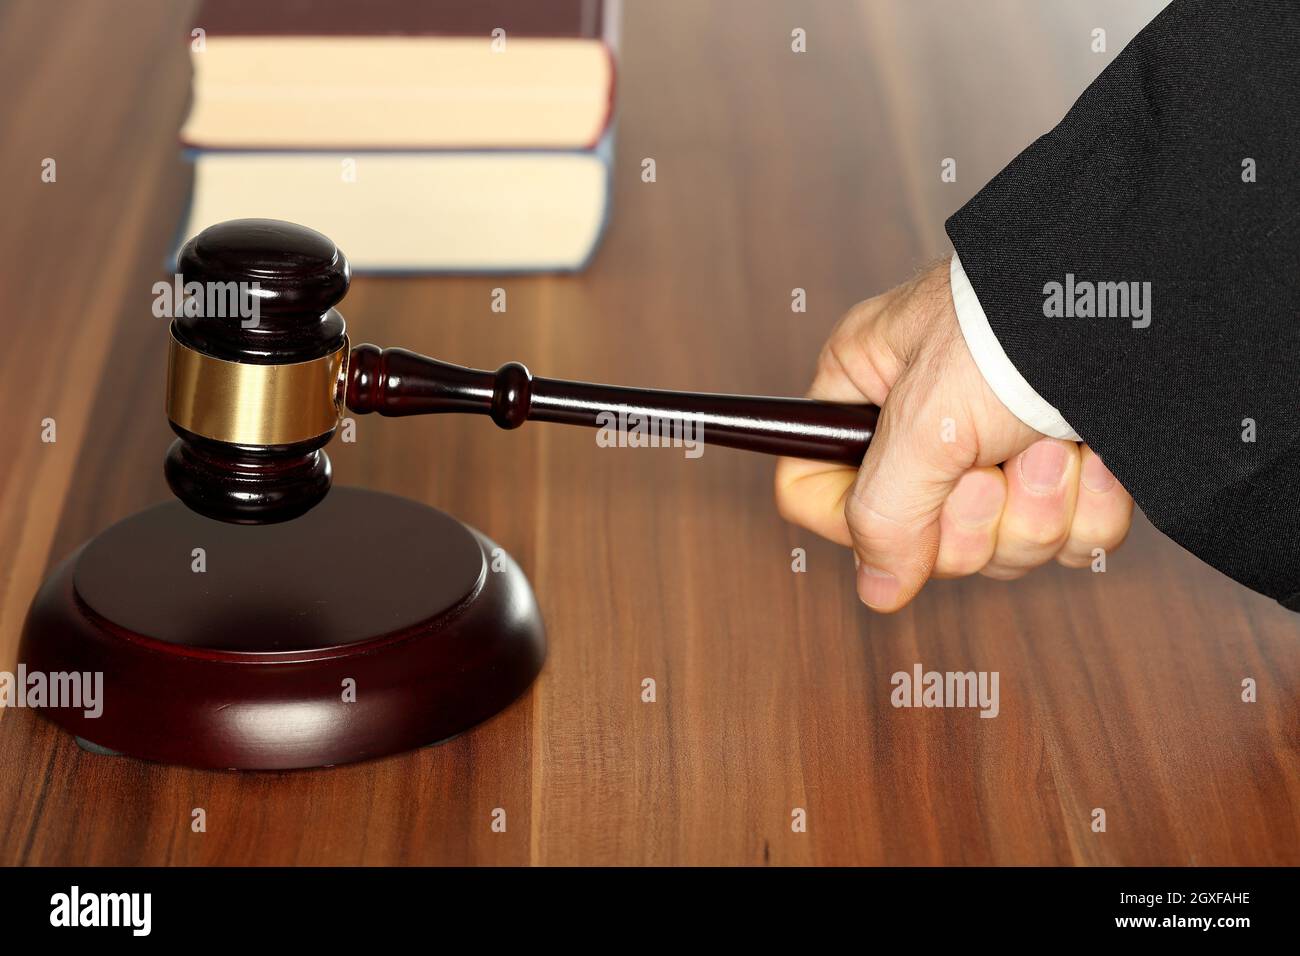 gavel and books, symbolic rights and justice Stock Photo